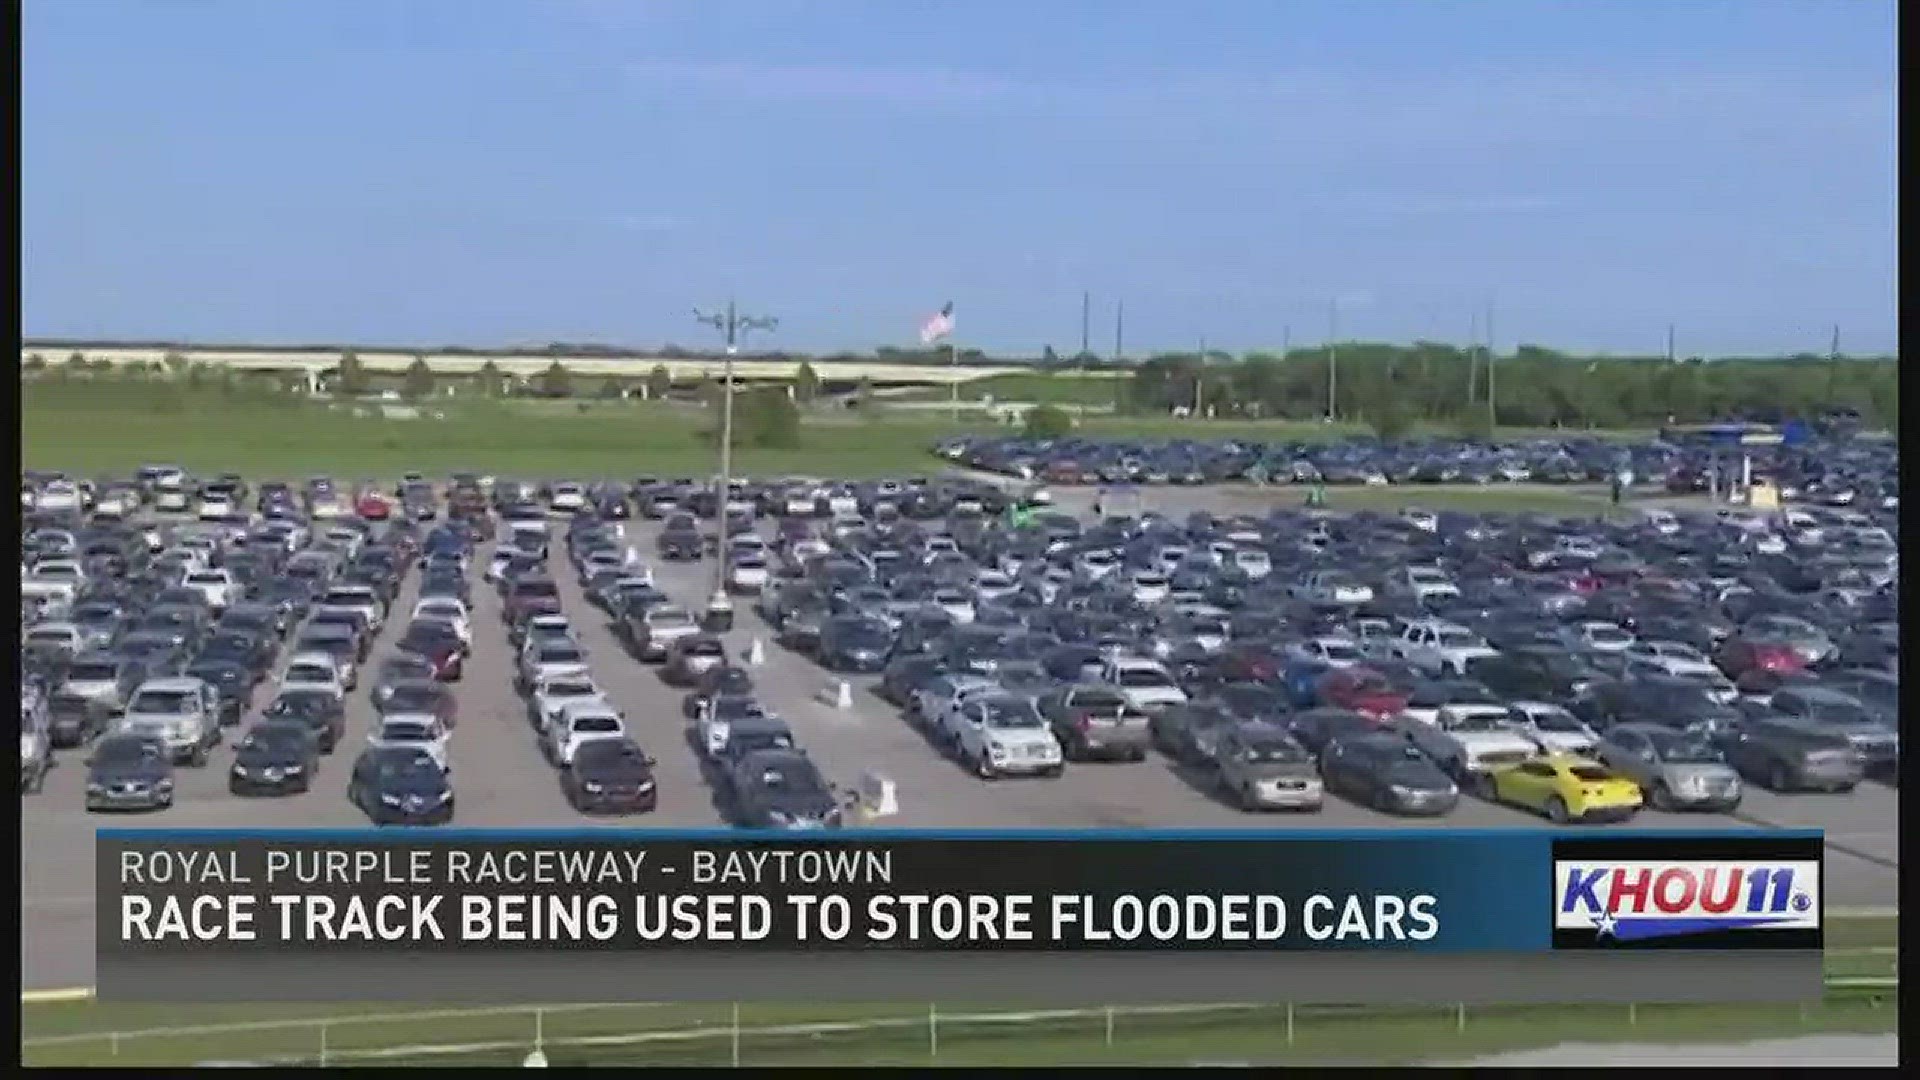 A race track in Baytown is being used to store thousands of vehicles that were flooded by Harvey.